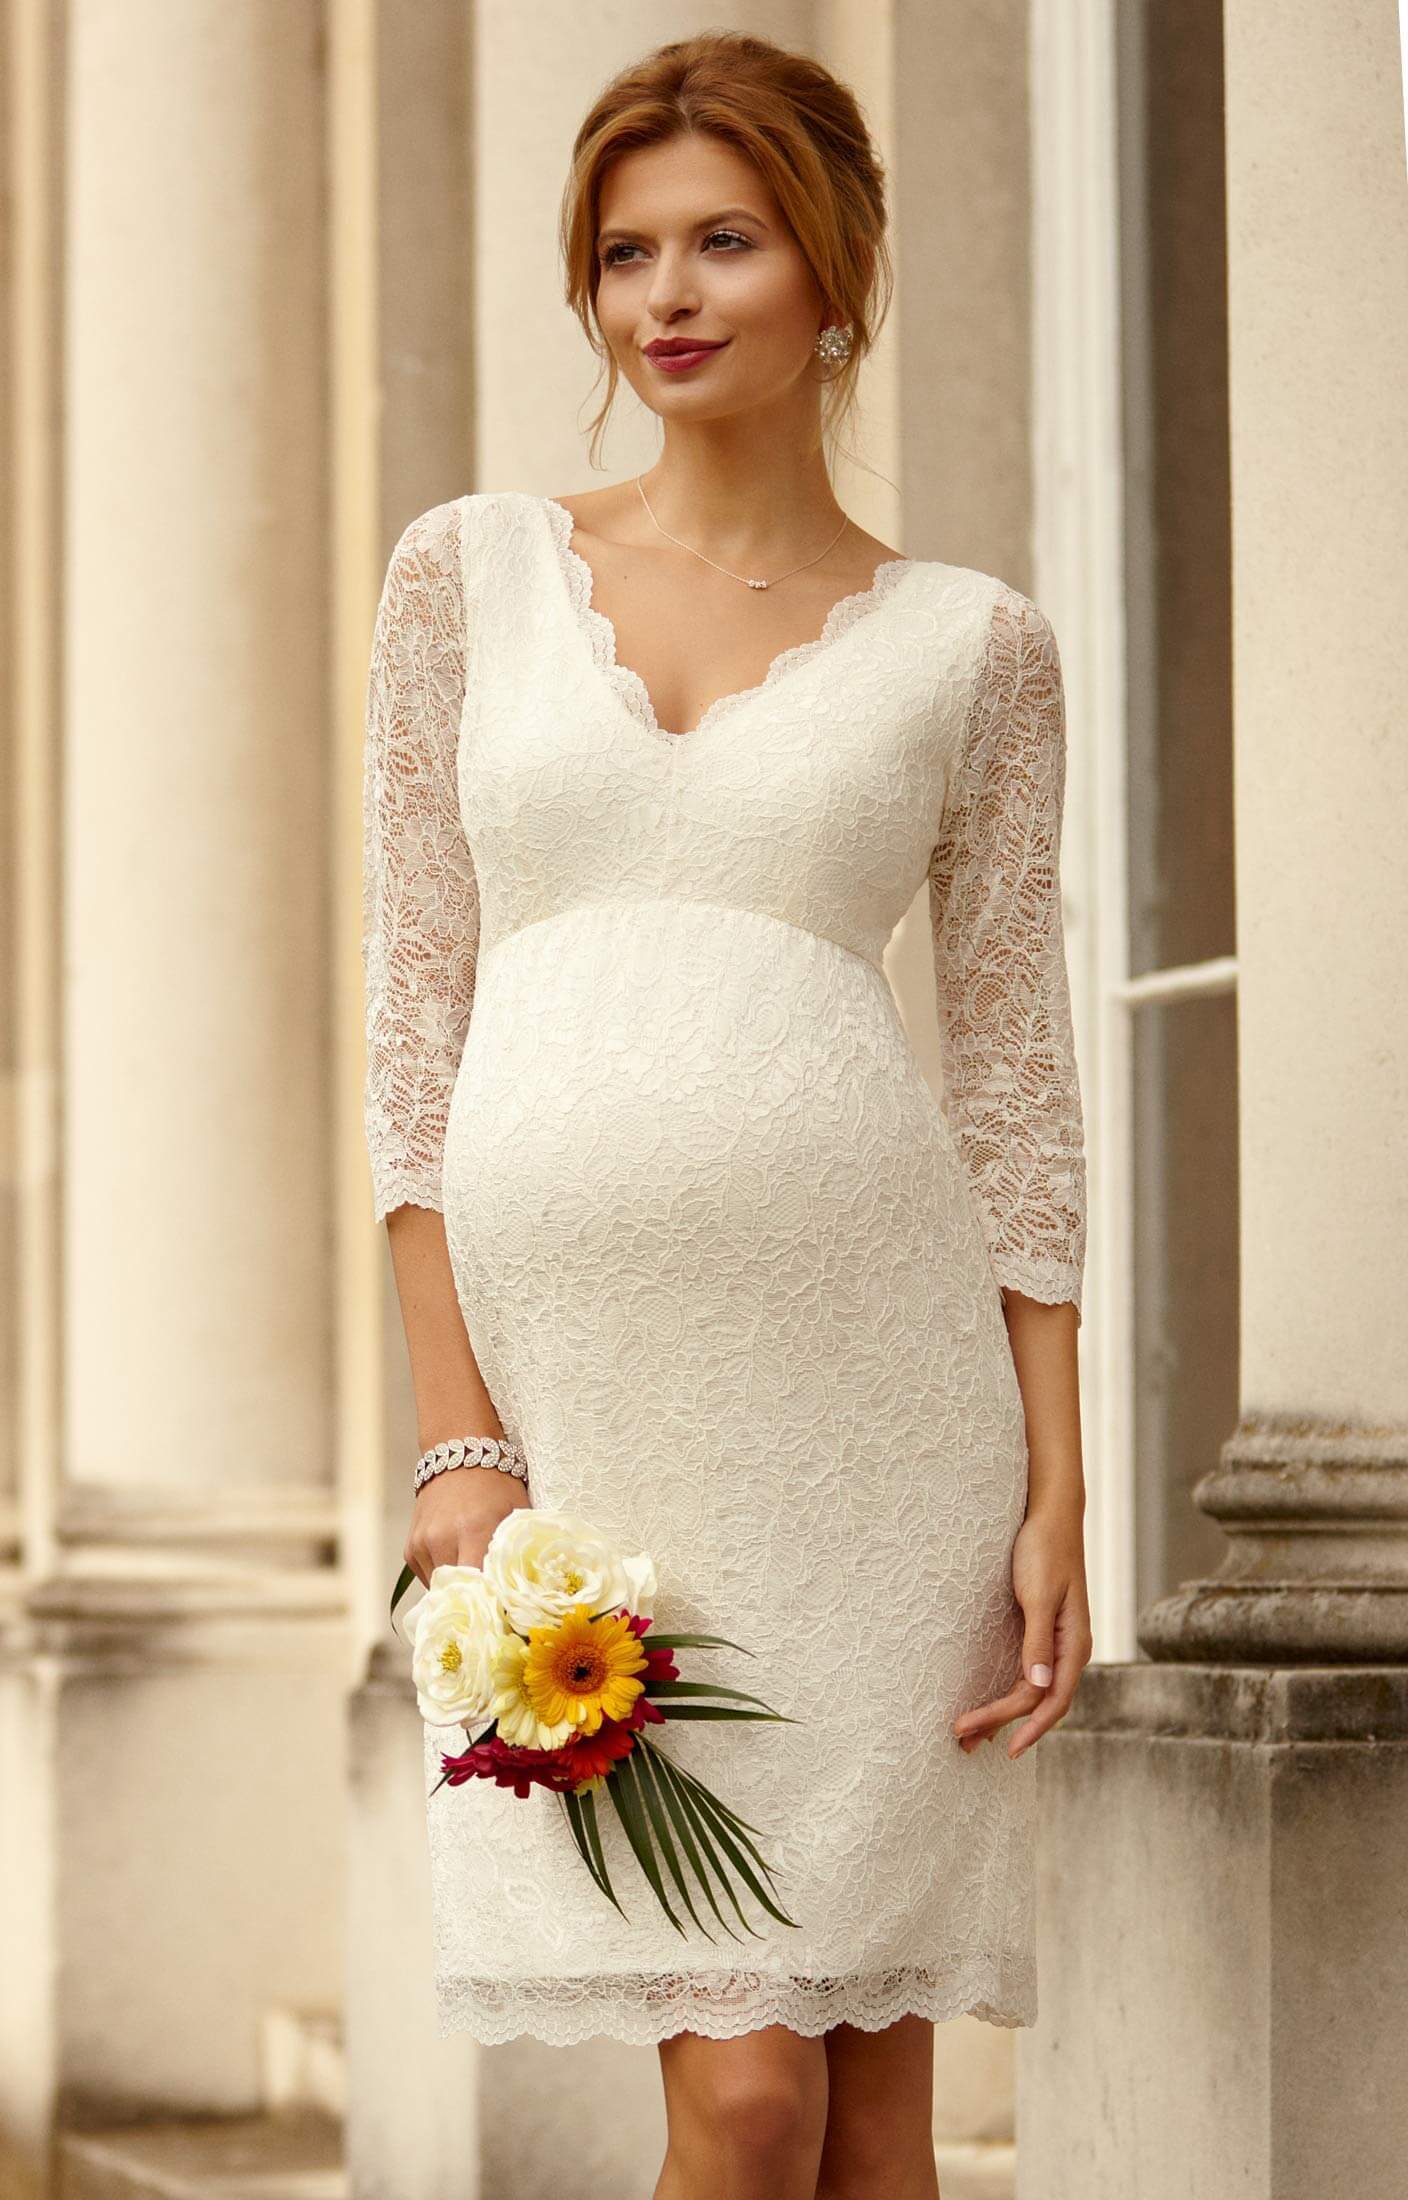 Maternity Wedding Dresses- Maternity Wedding Gowns and Maternity ...